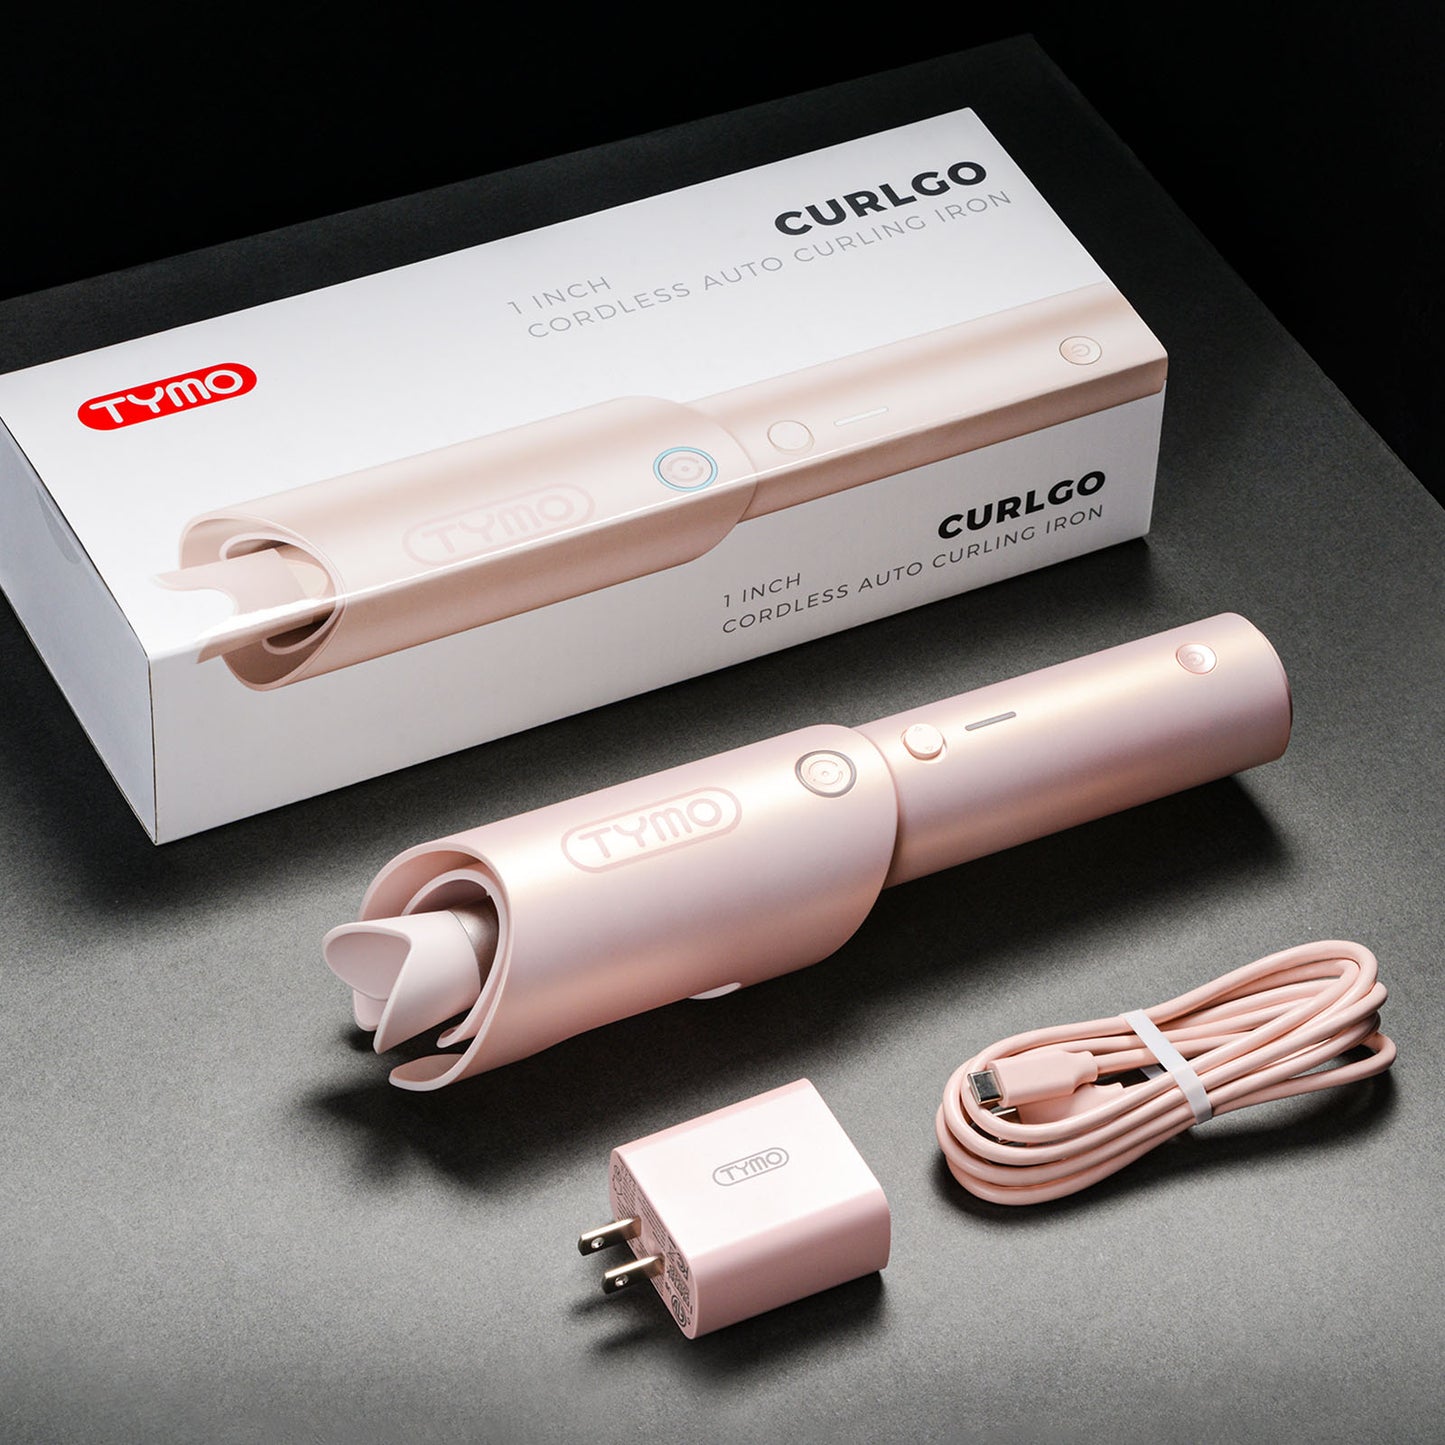 
                  
                    Packaging of TYMO CURLGO cordless curling iron, highlighting the sleek design and included items such as a charging cable and plug.
                  
                